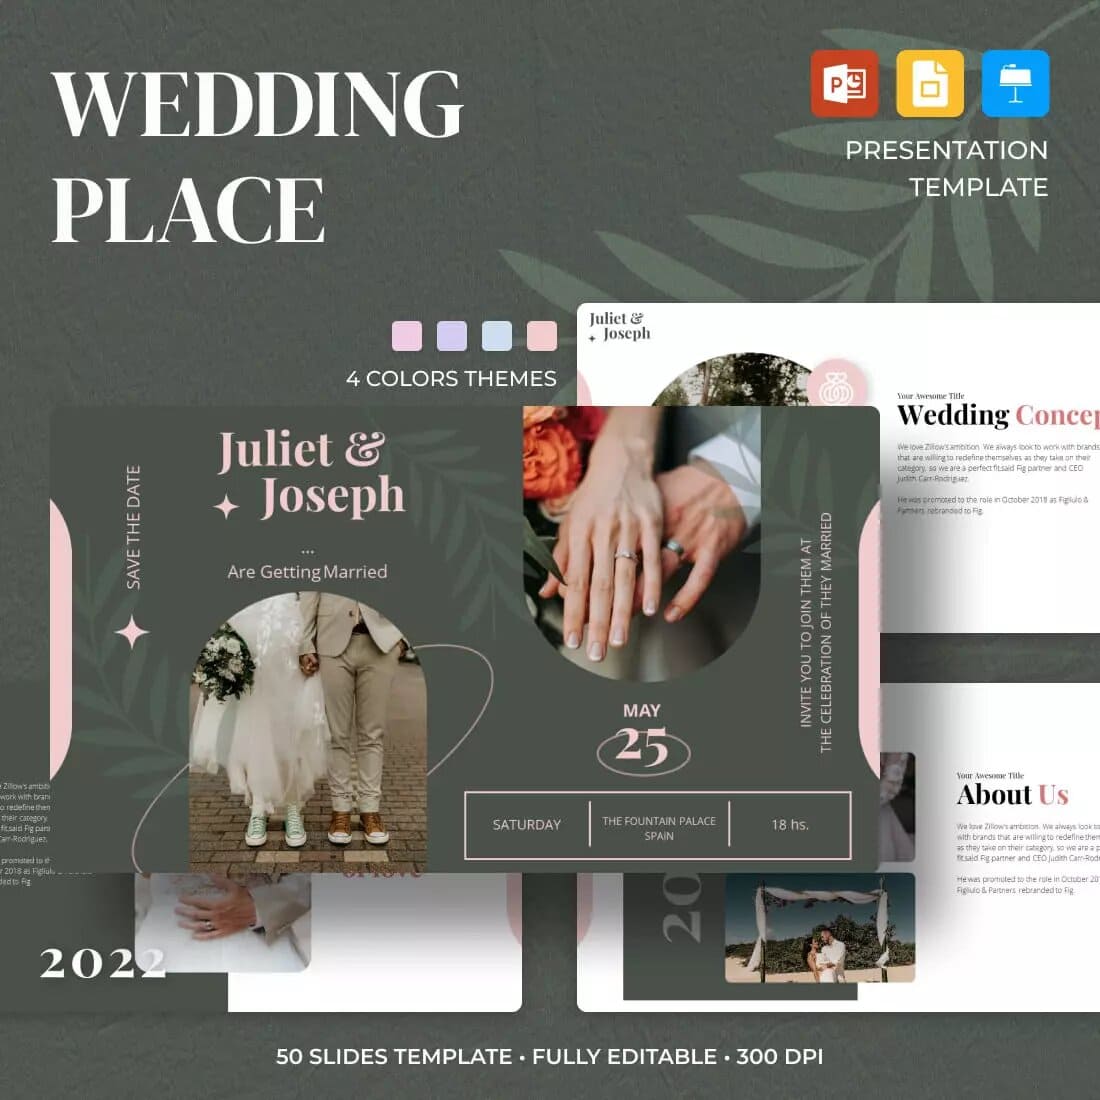 Wedding Place Presentation Template Preview 3.